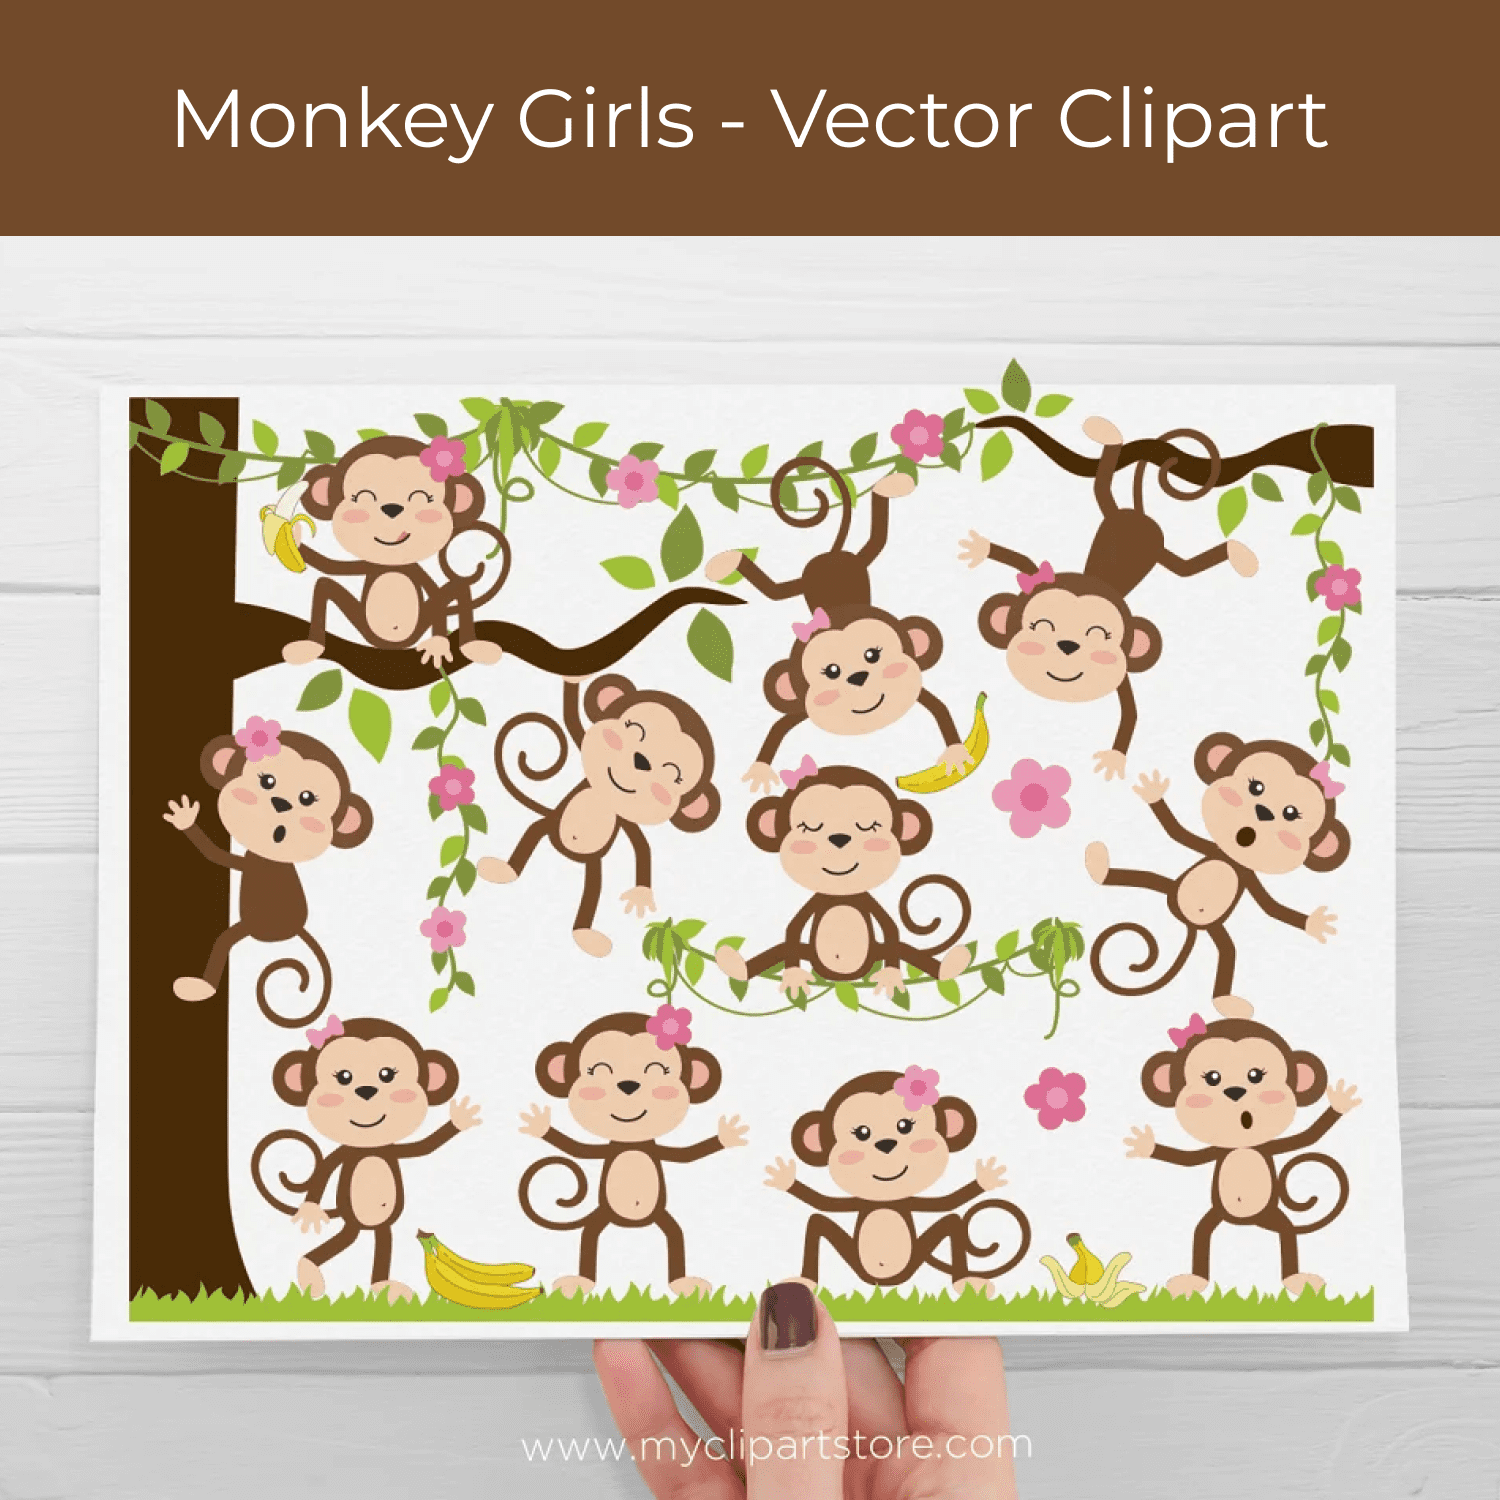 Save Monkey Girls - Vector Clipart cover.